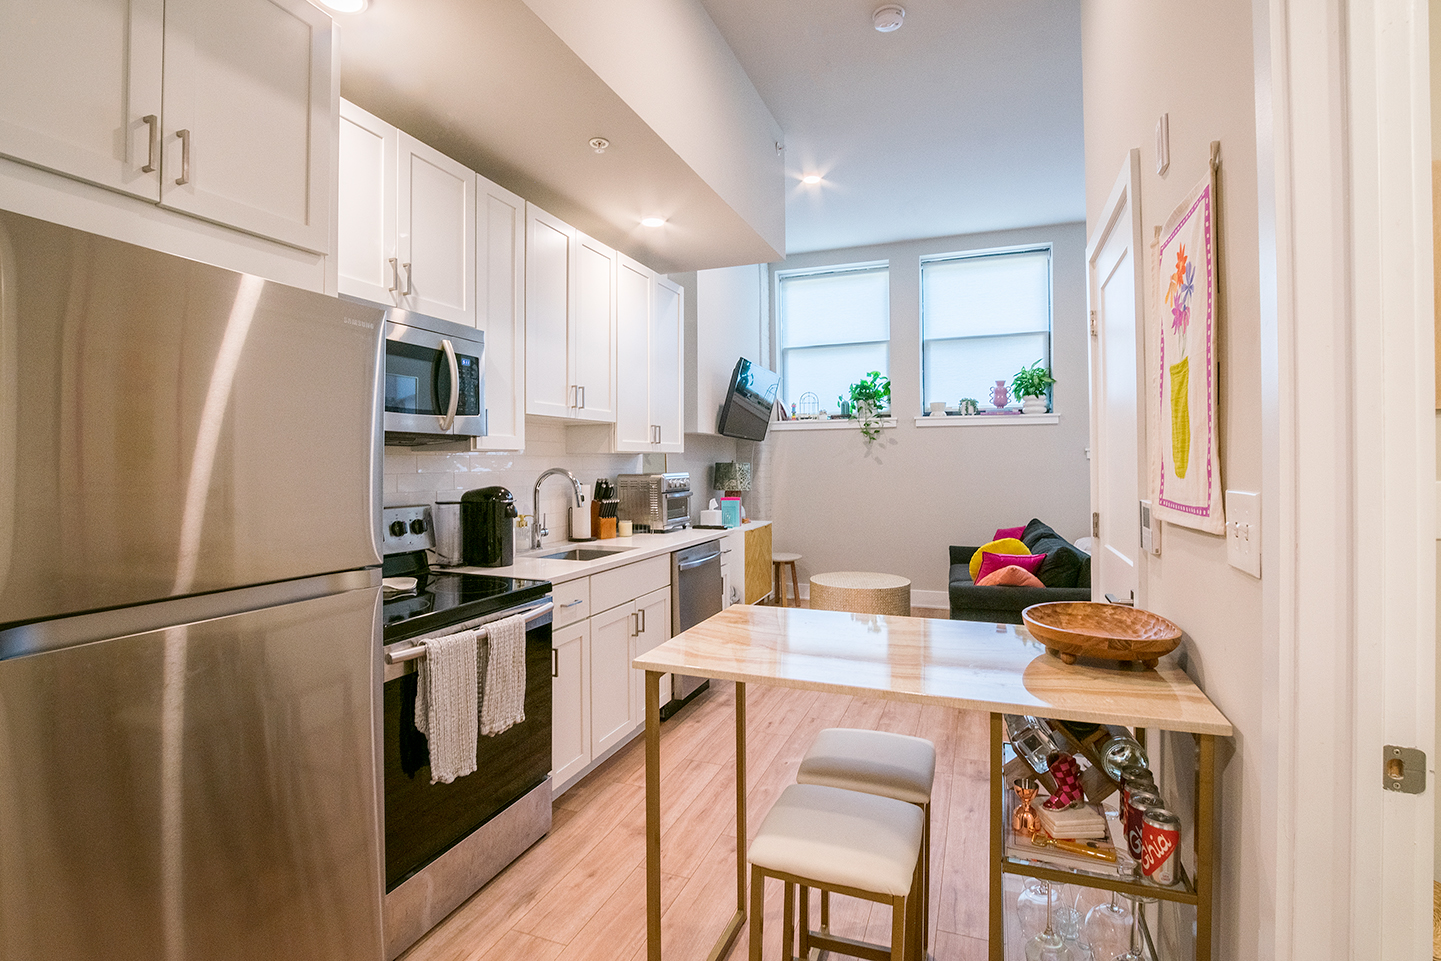 Property Photo For 1300 S. 19th St, Unit 4